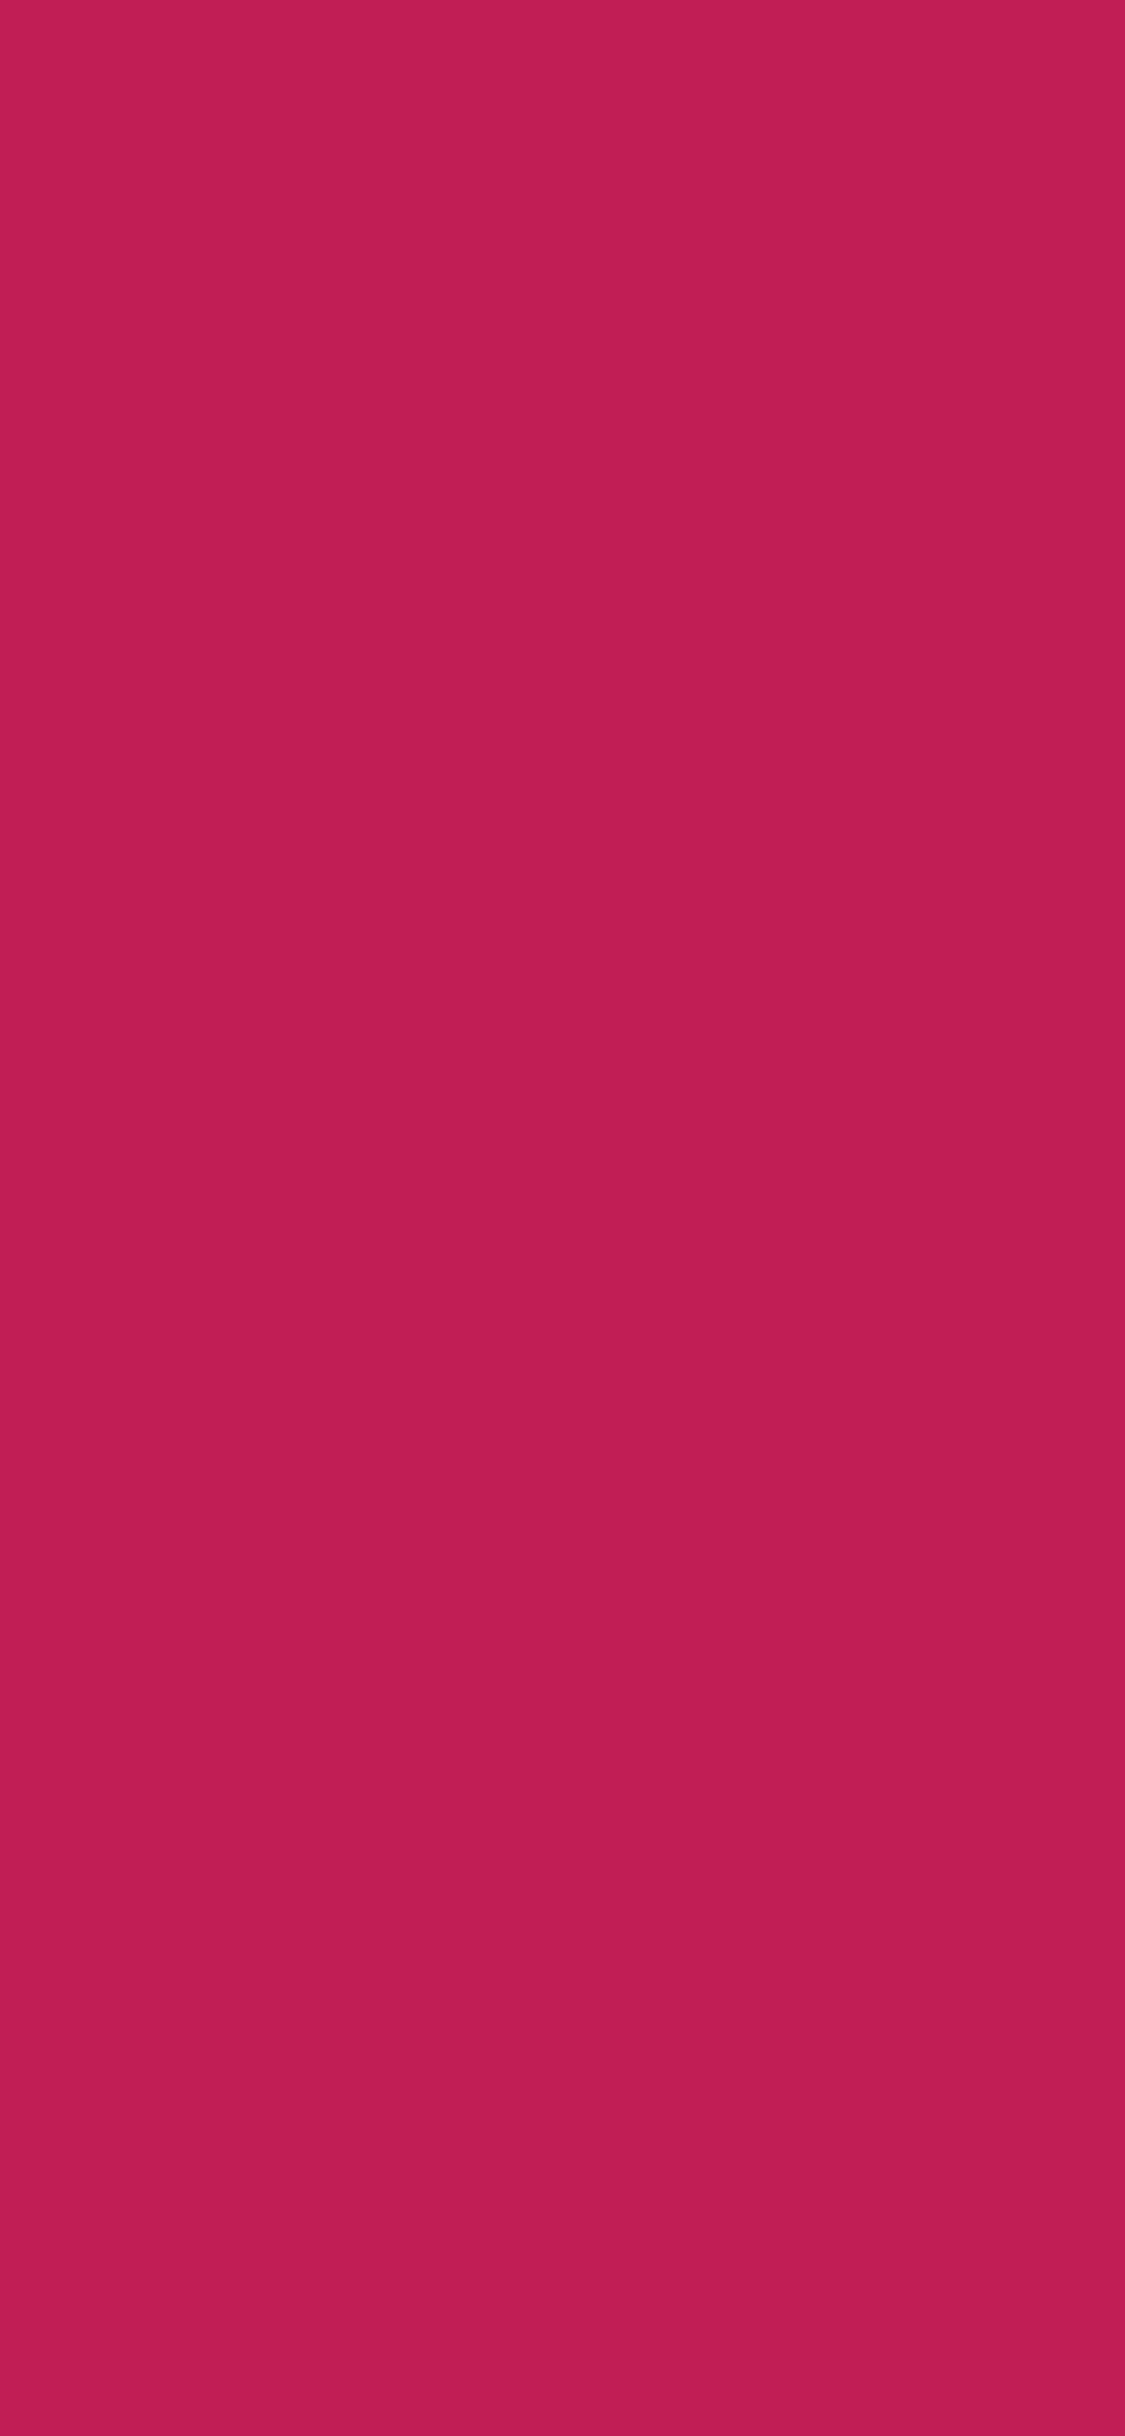 1125x2436 Rose Red Solid Color Background